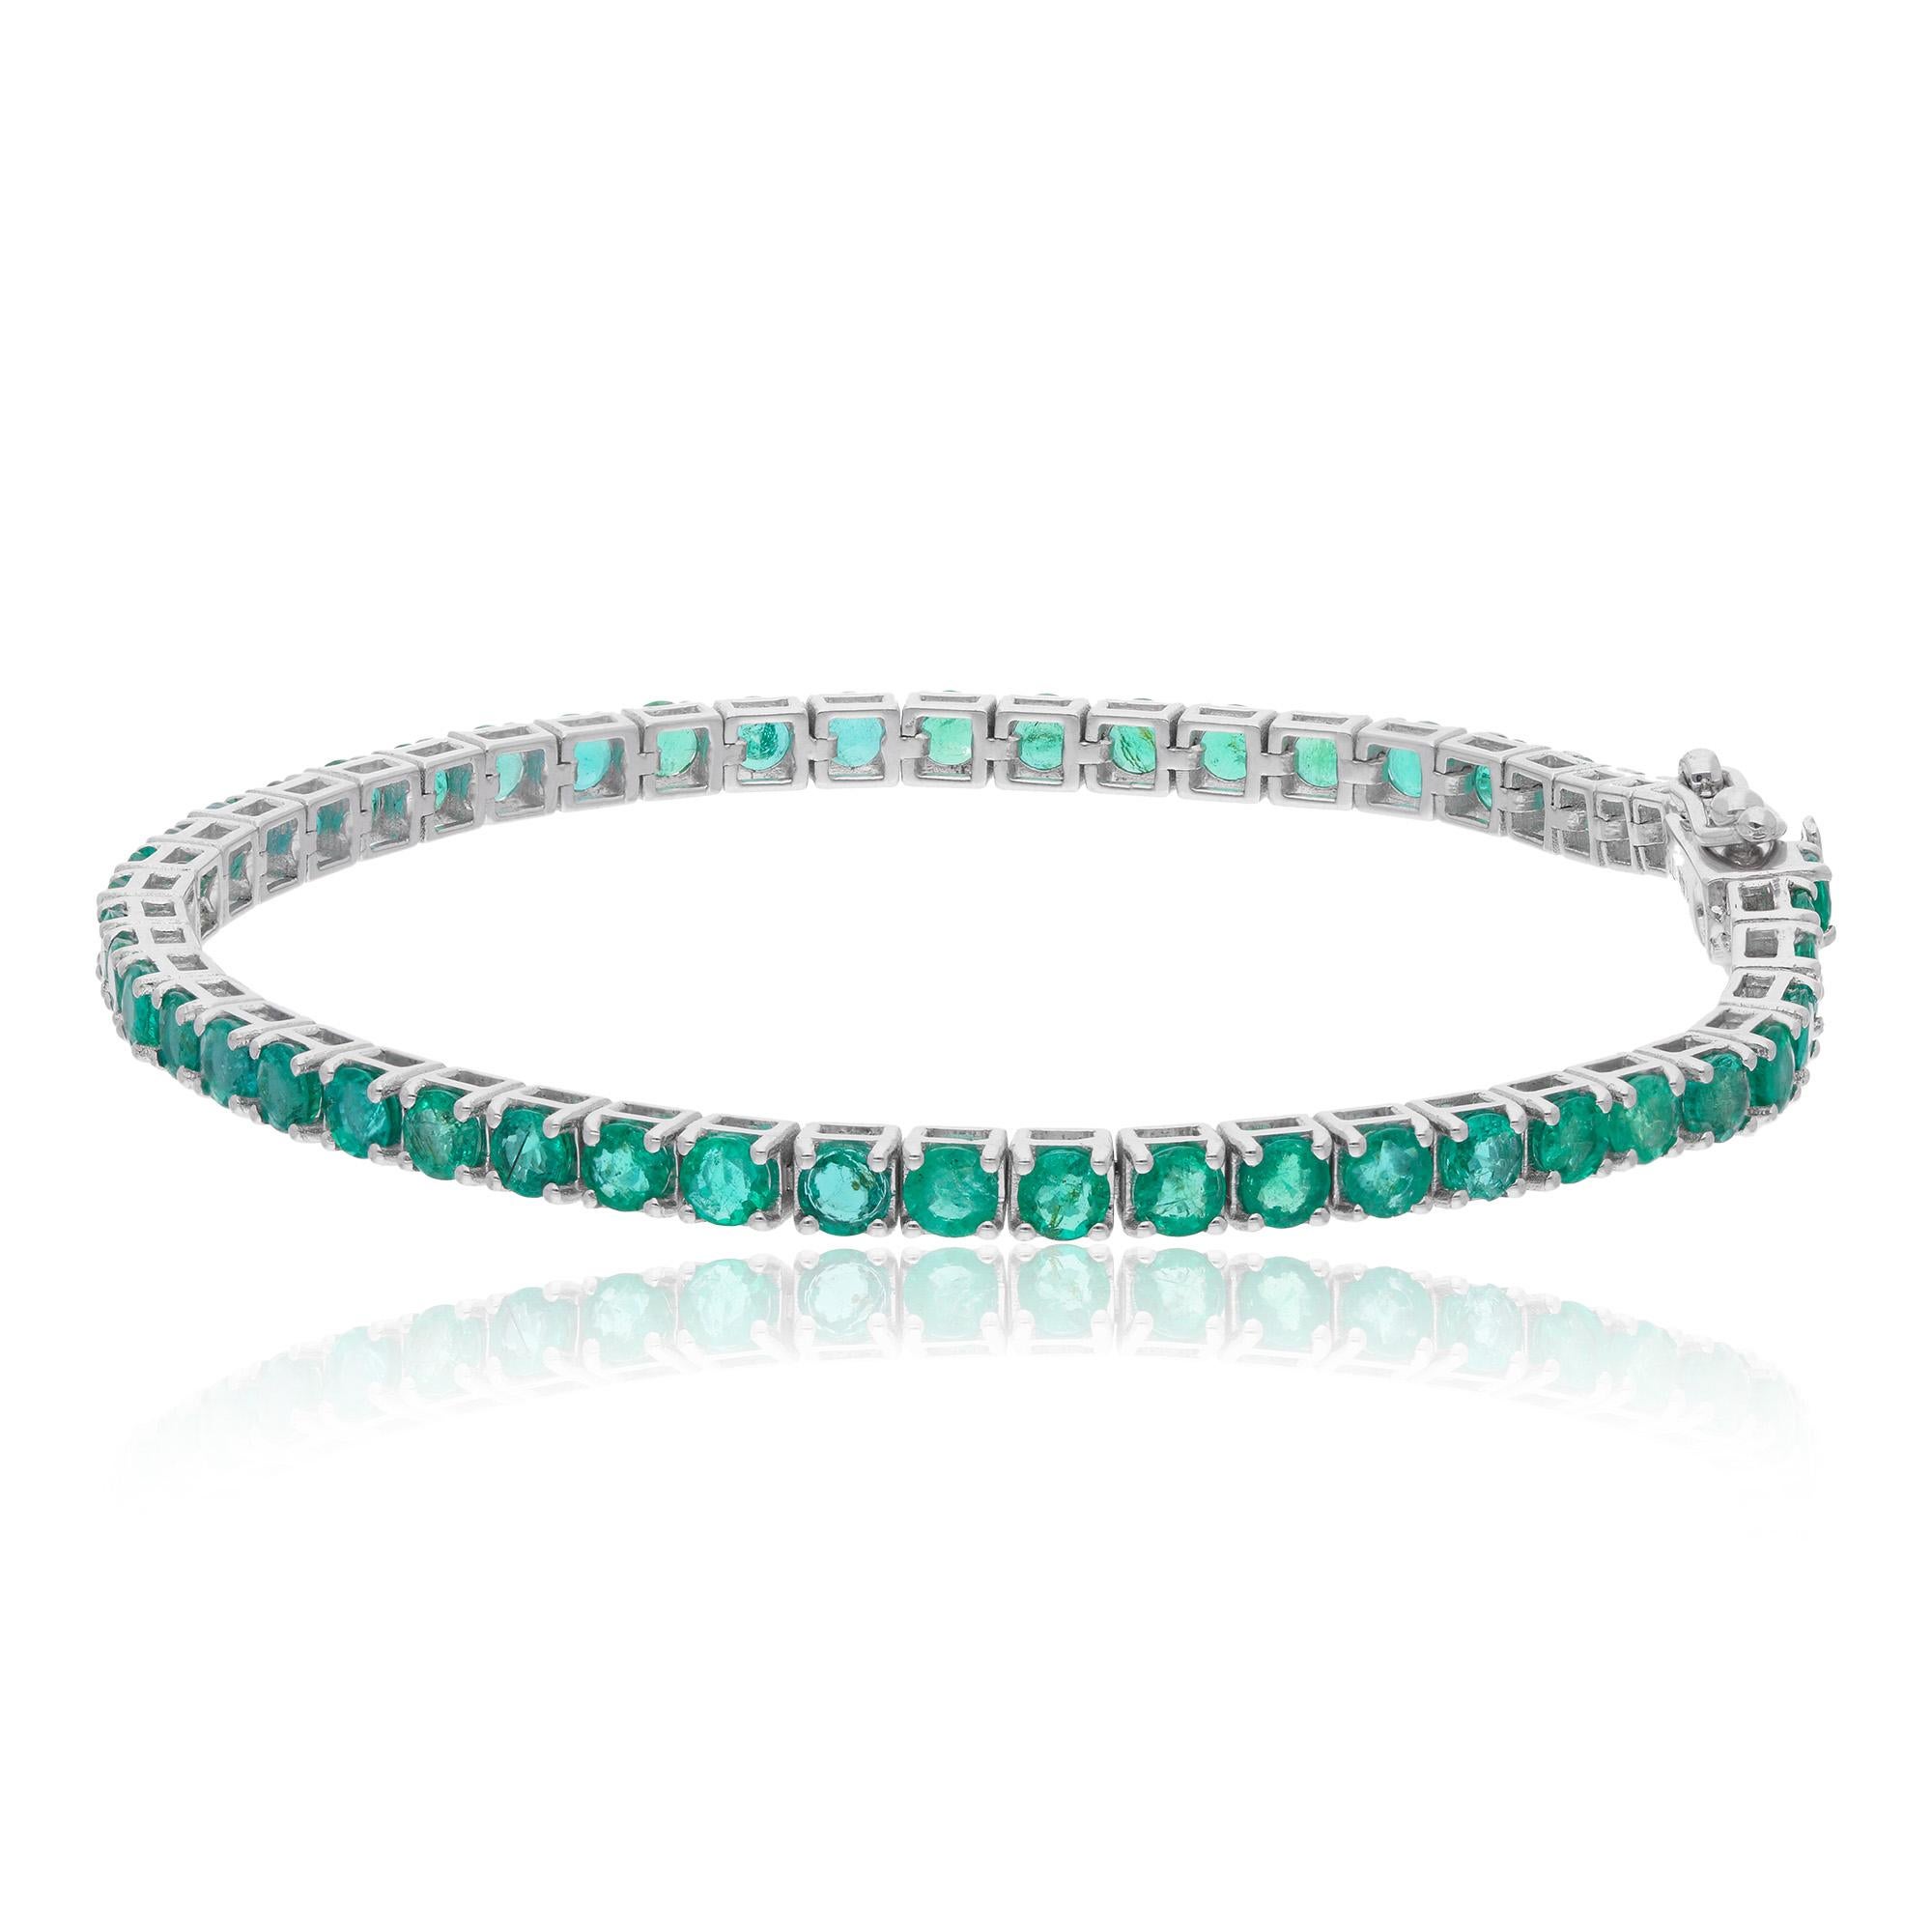 Item Code :- SFBR-4300
Gross Wt. :- 10.09 gm
14k Solid White Gold Wt. :- 8.93 gm
Zambian Emerald Wt. :- 5.80 Ct. 
Bracelet Length :- 7 Inches Long

✦ Sizing
.....................
We can adjust most items to fit your sizing preferences. Most items